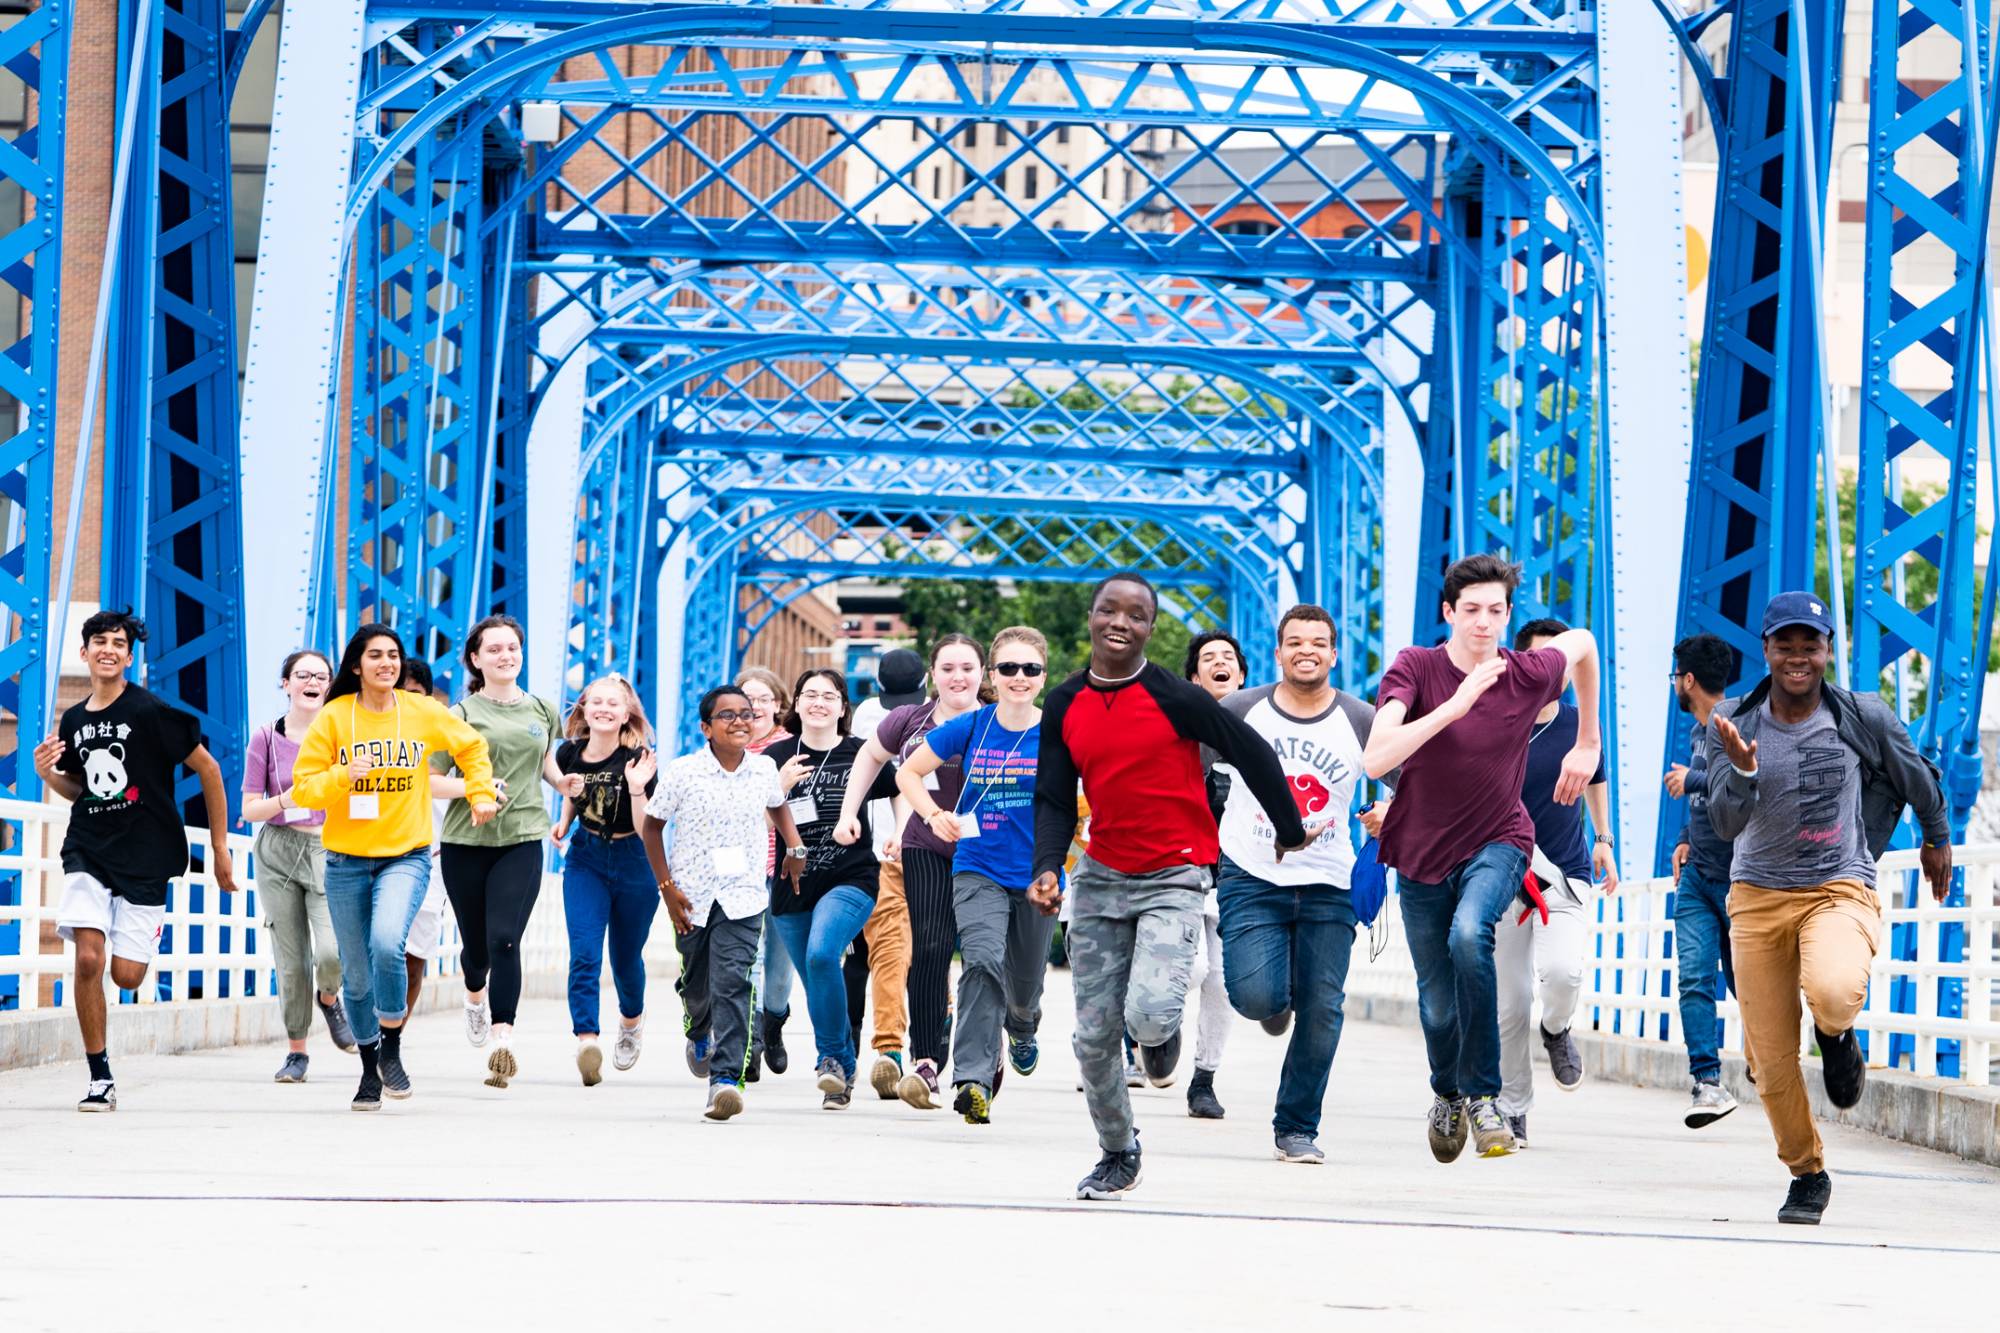 Students running enthusiastically across the Blue Bridge